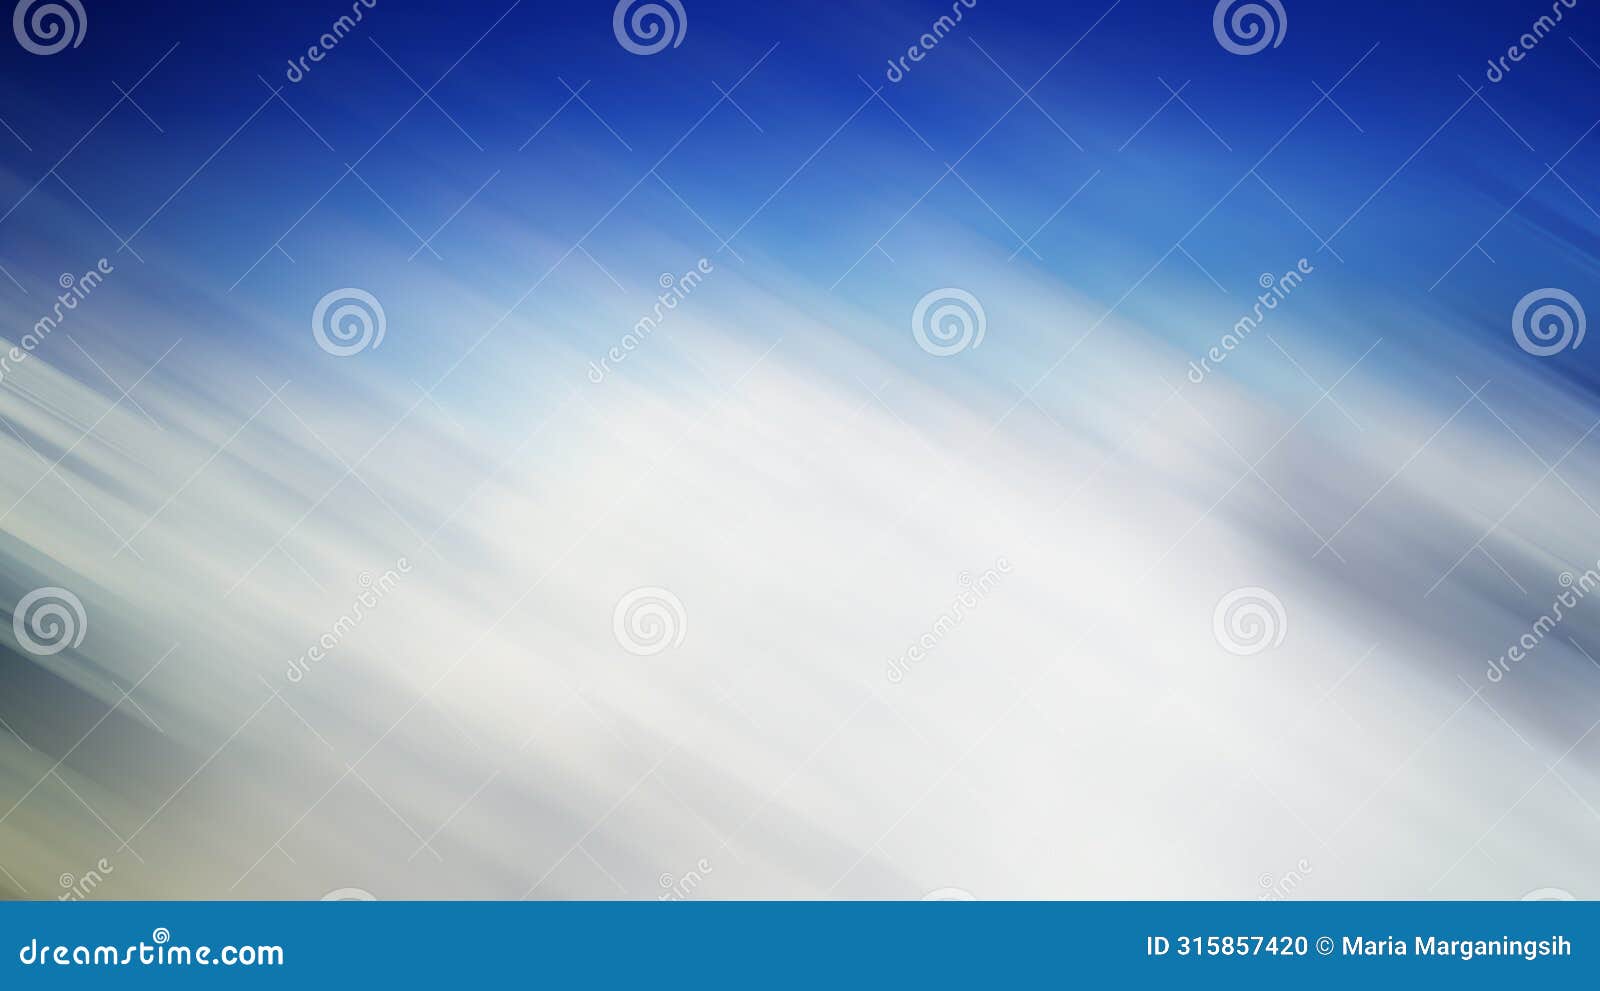 blue and white abstract backgrounds. white and gray gradation color background with half frame blue color.